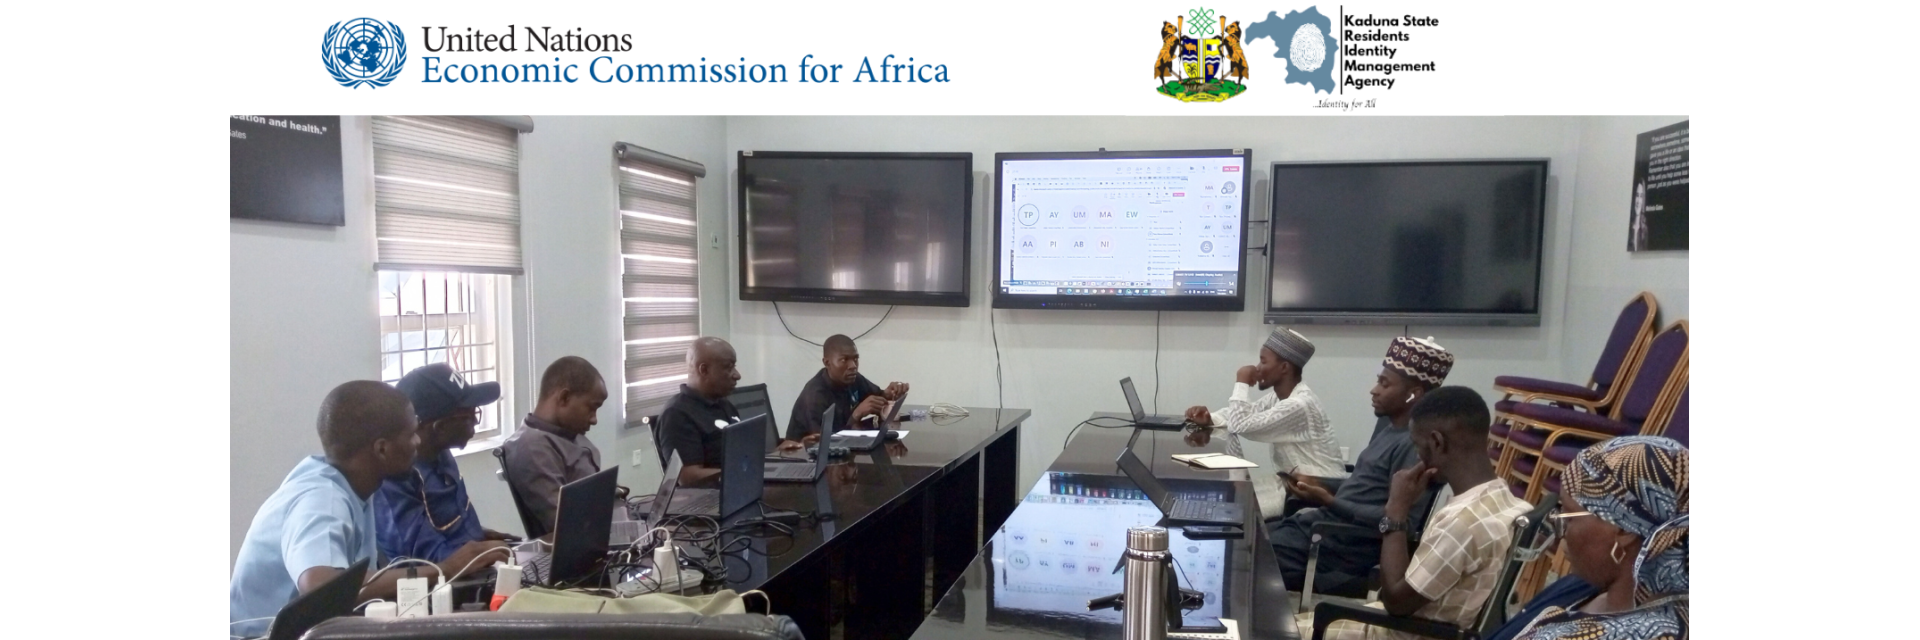 United Nations Economic Commission for Africa and Kaduna State Government Conducts Comprehensive Training on New Pensioner Verification App for KADRIMA and Pension Bureau Staff